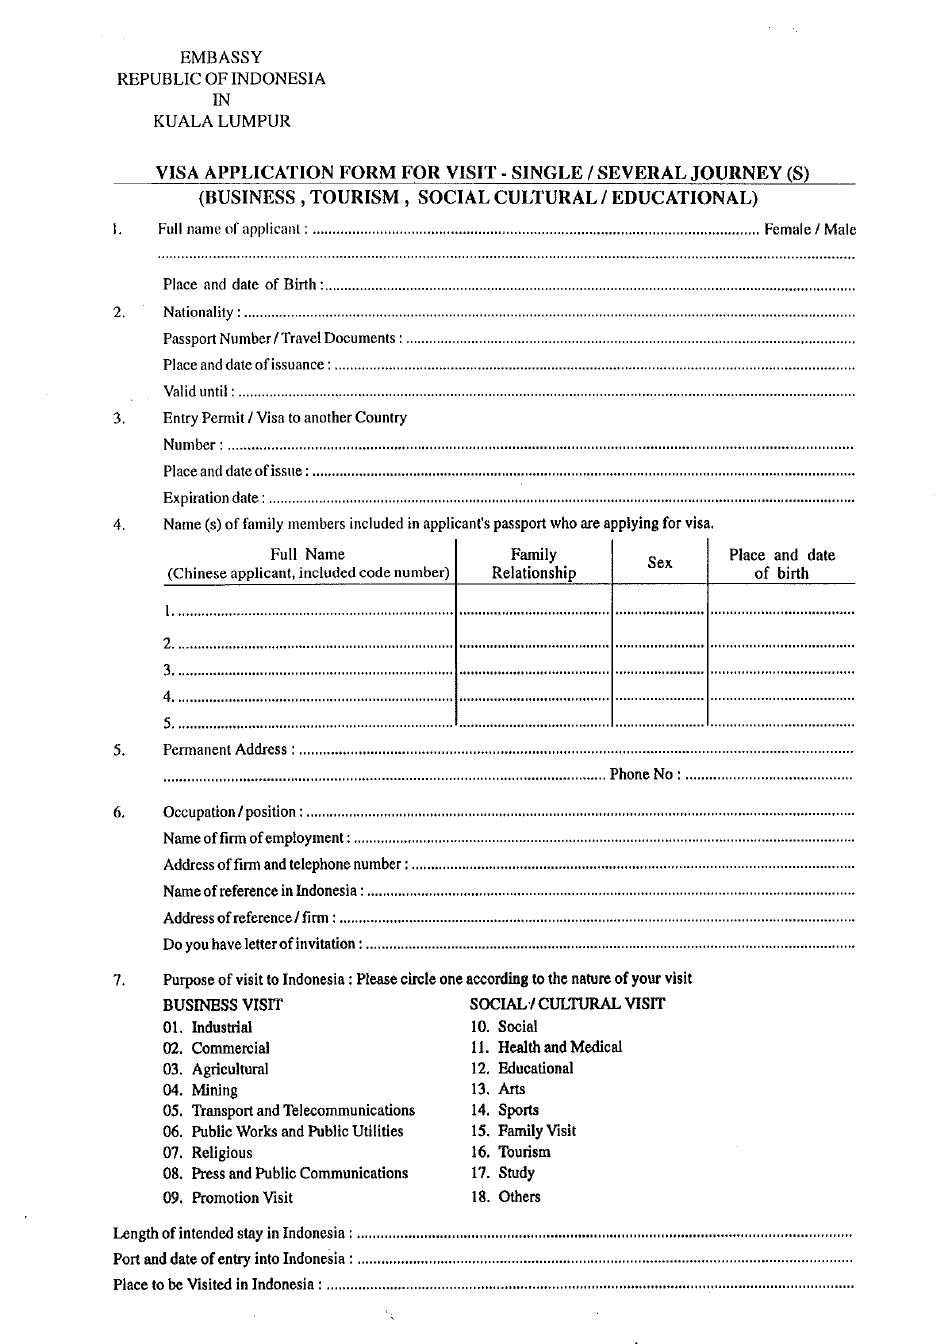 Indonesian Visa Application Form for Visit - Single / Several Journey(S) (Business, Tourism, Social Cultural / Educational) - Embassy of the Republic of Indonesia in Kuala Lumpur - Kuala Lumpur, Malaysia, Page 1